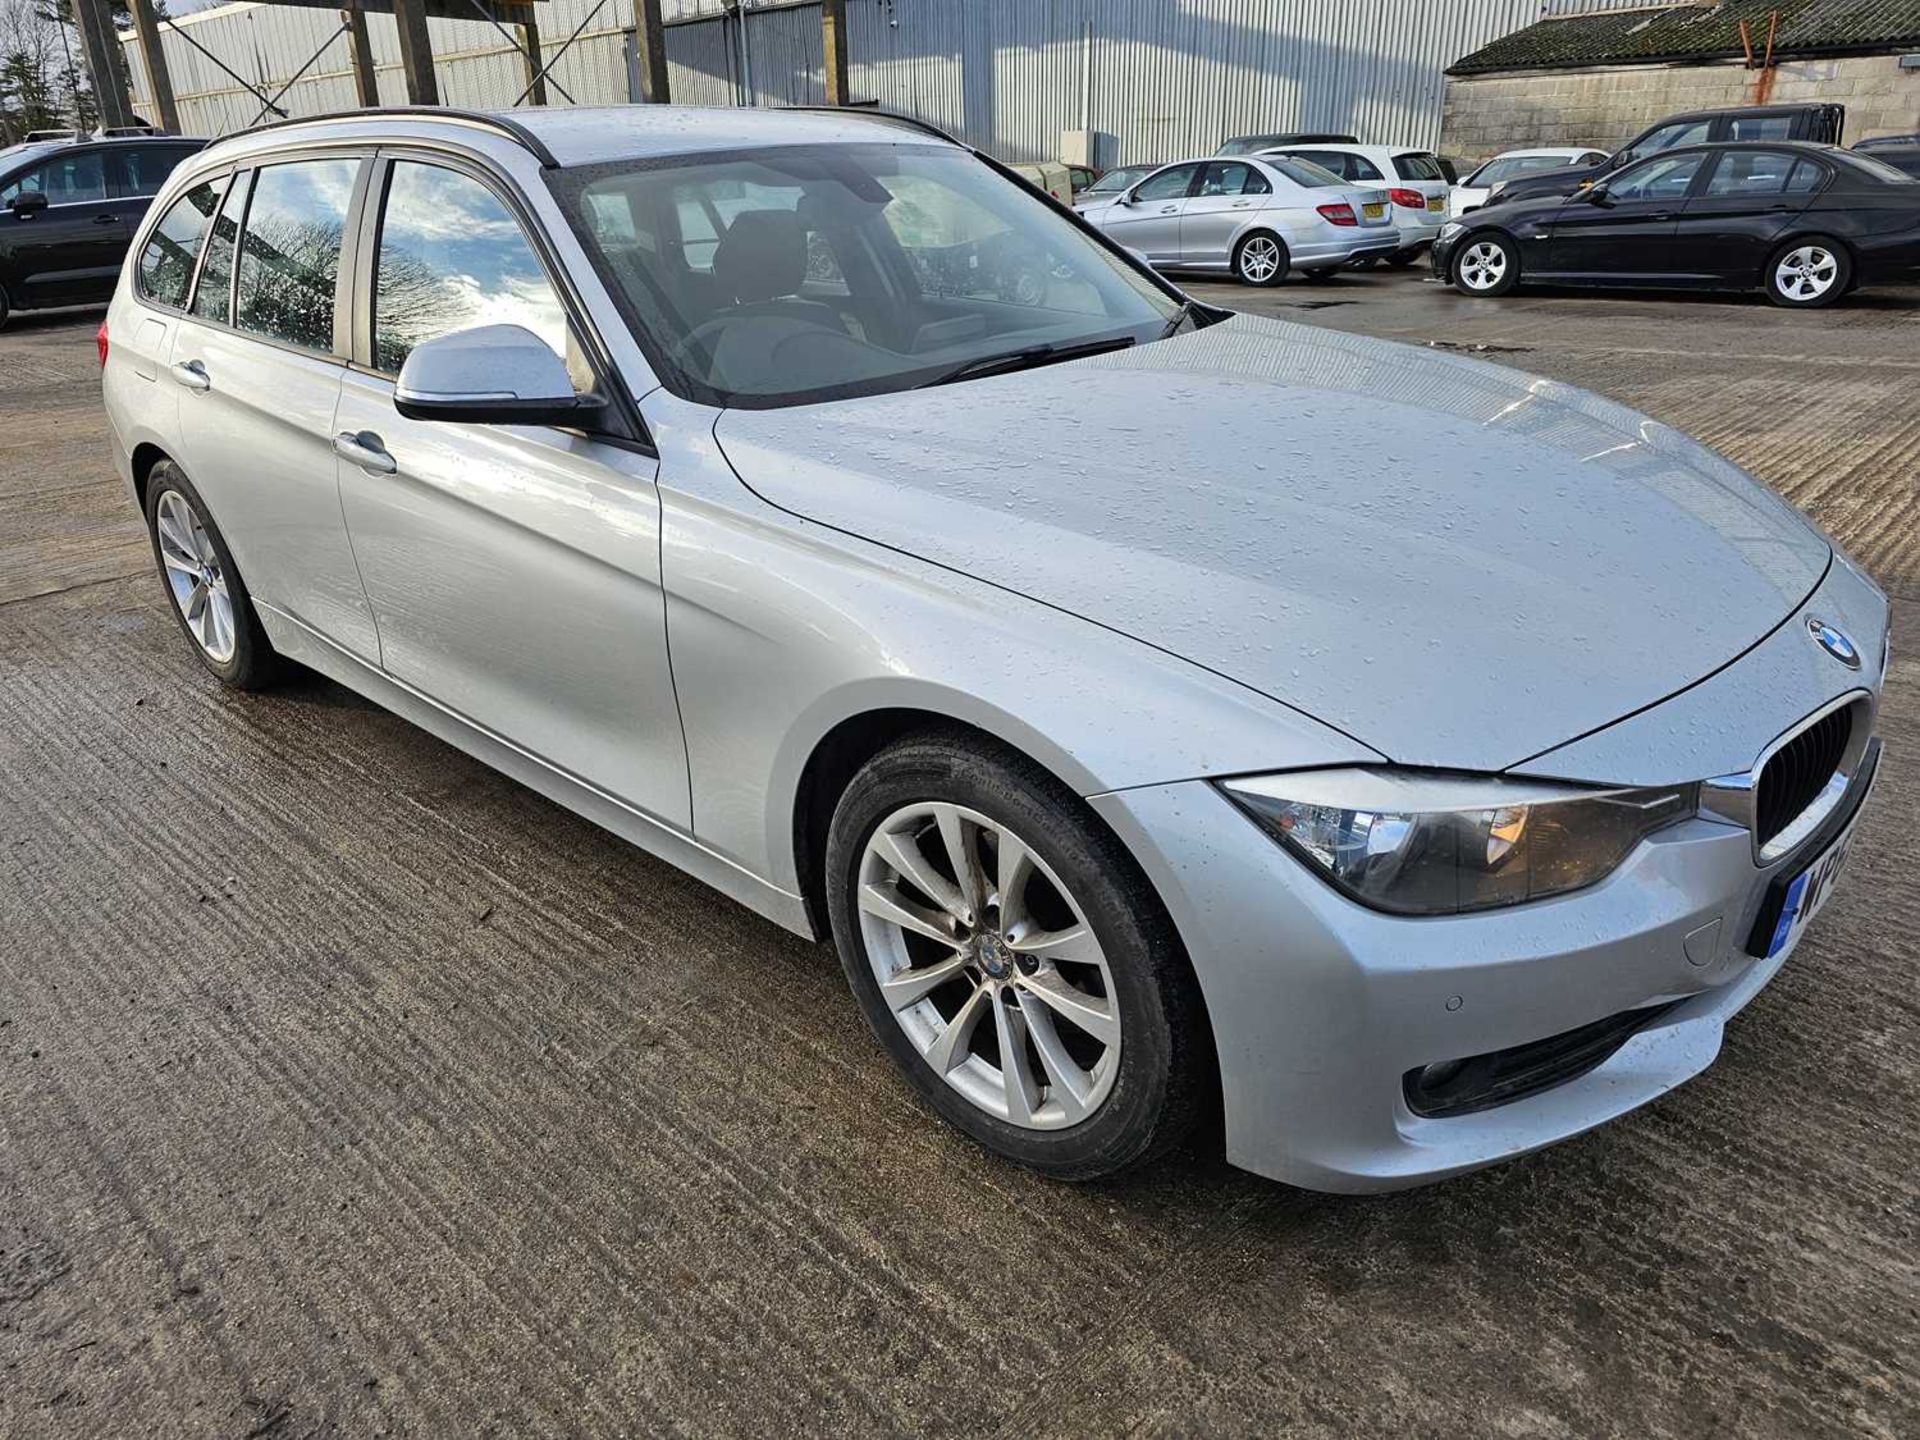 2013 BMW 320D Estate, Auto, Parking Sensors, Full Leather, Heated Seats, Bluetooth, Cruise Control,  - Image 8 of 29